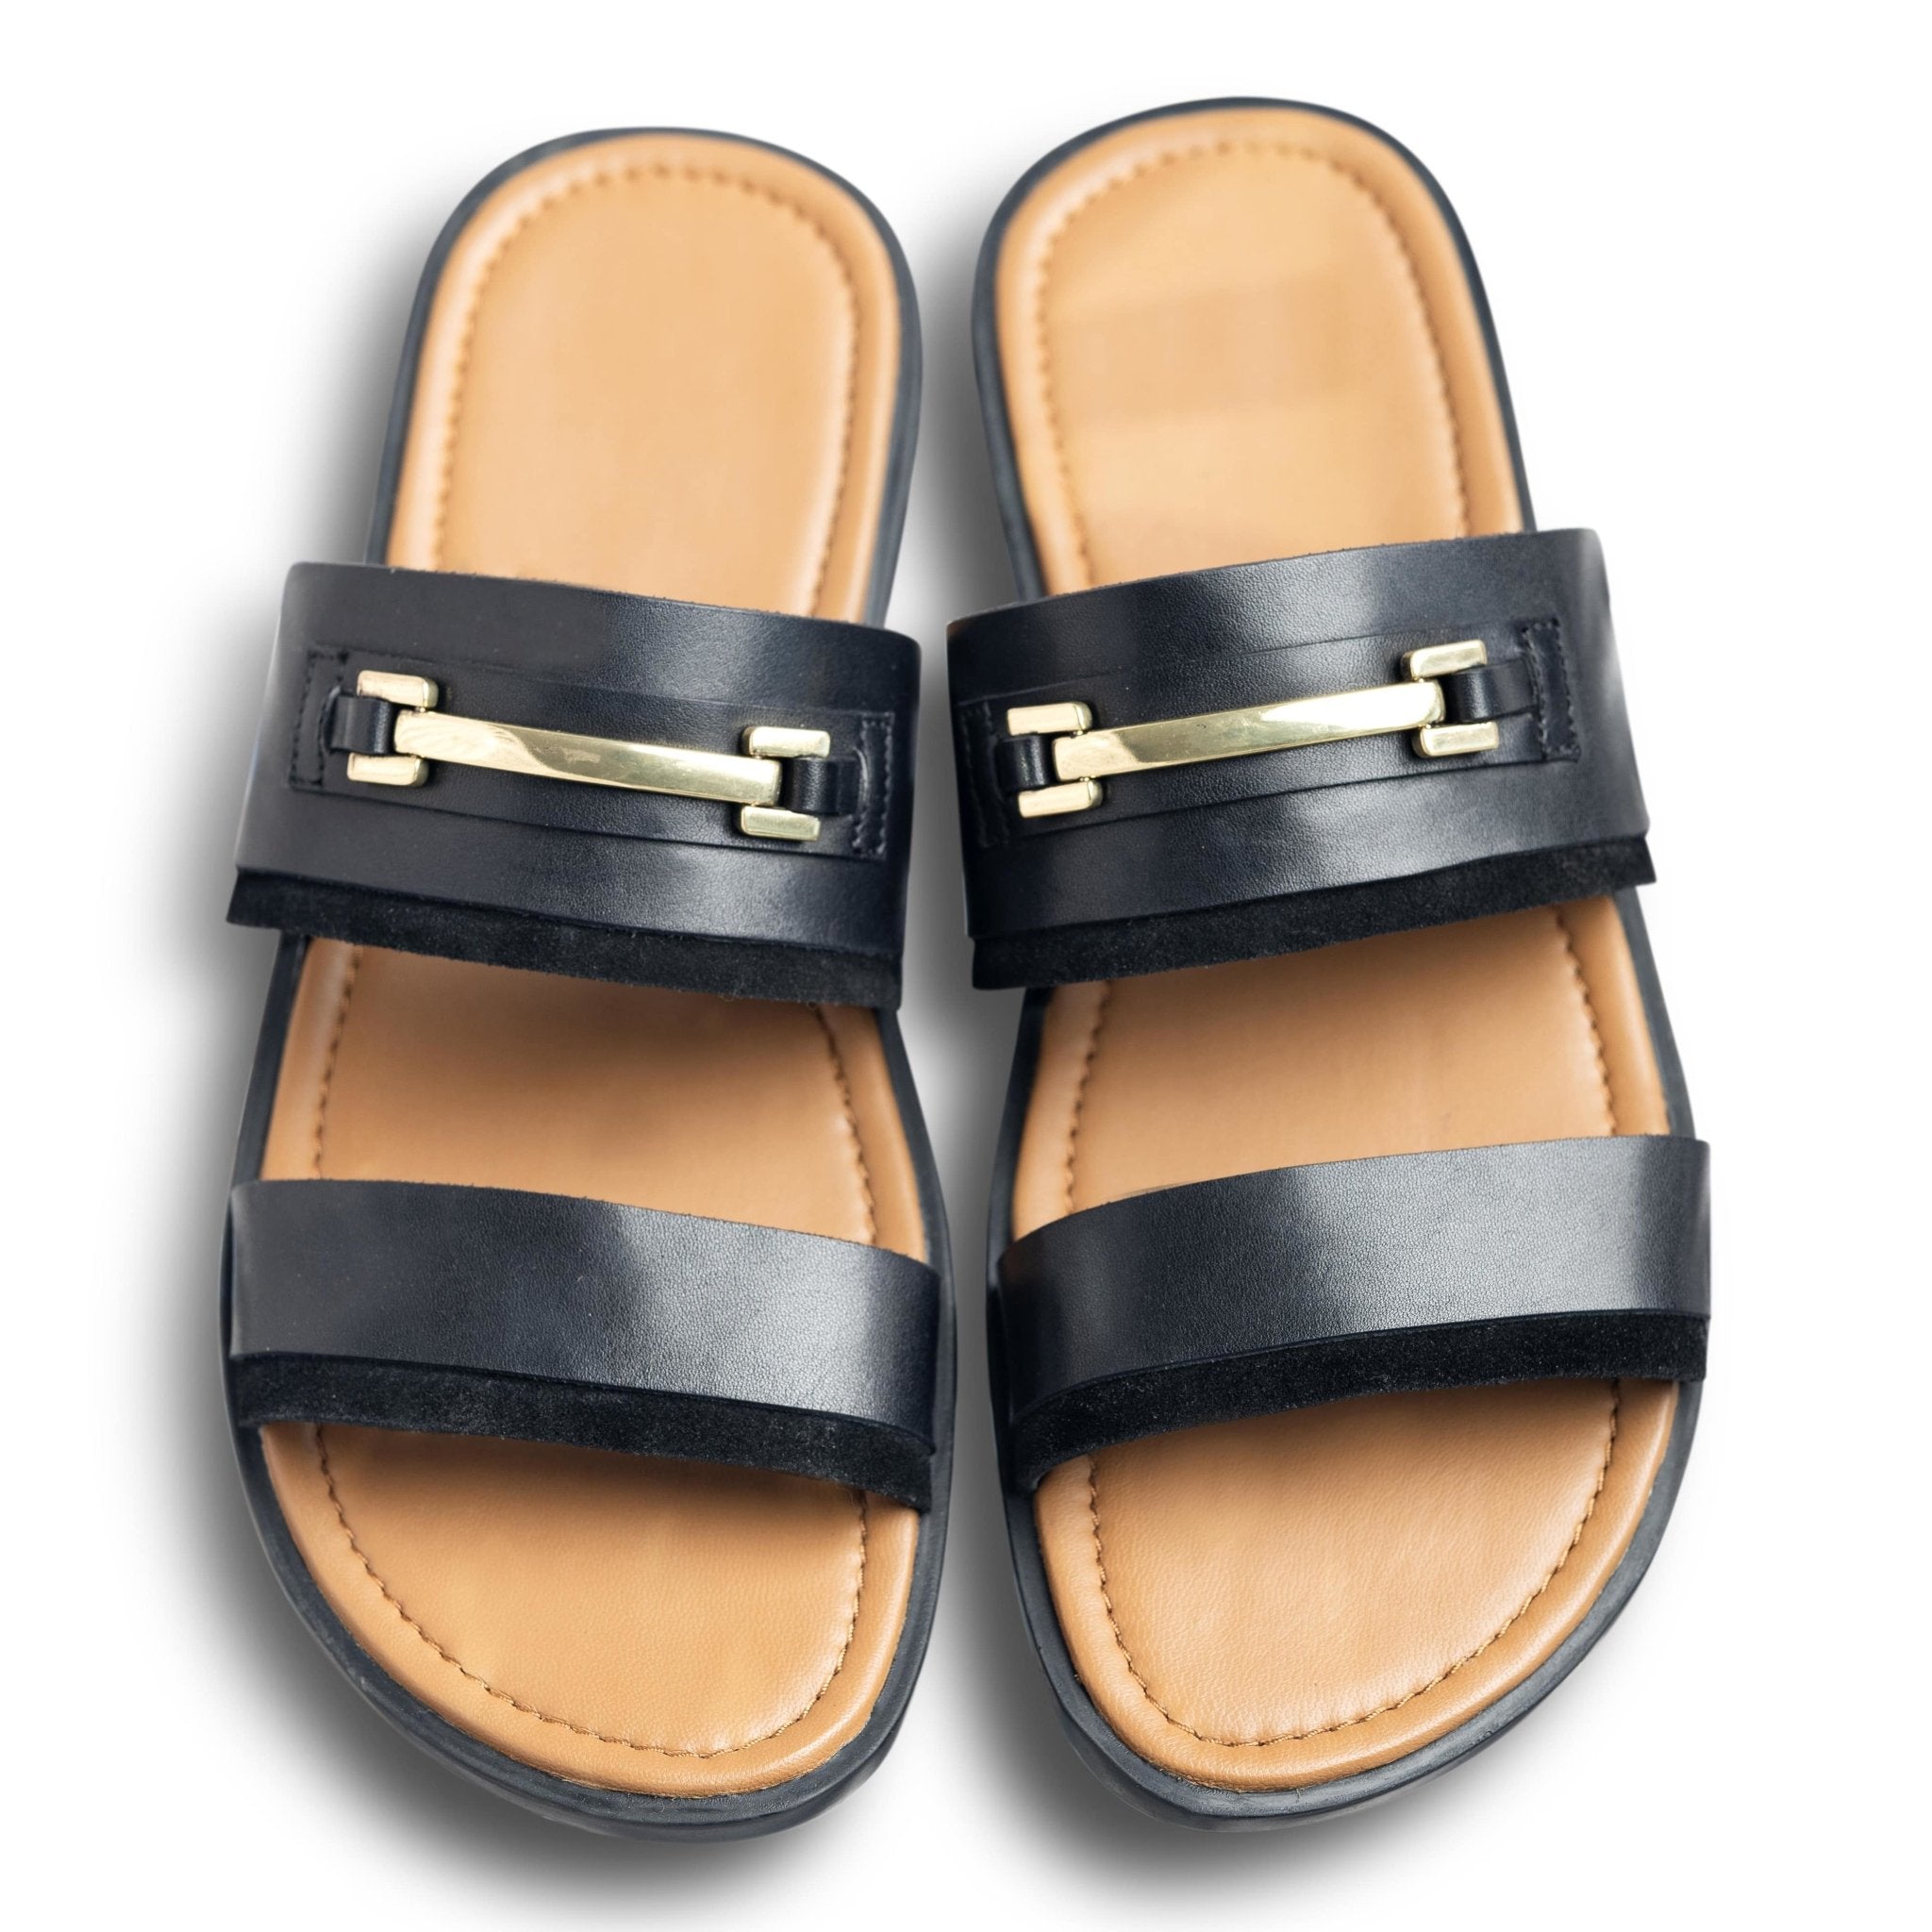 Brown and Golden Wedding Sandals, Size: 36-41